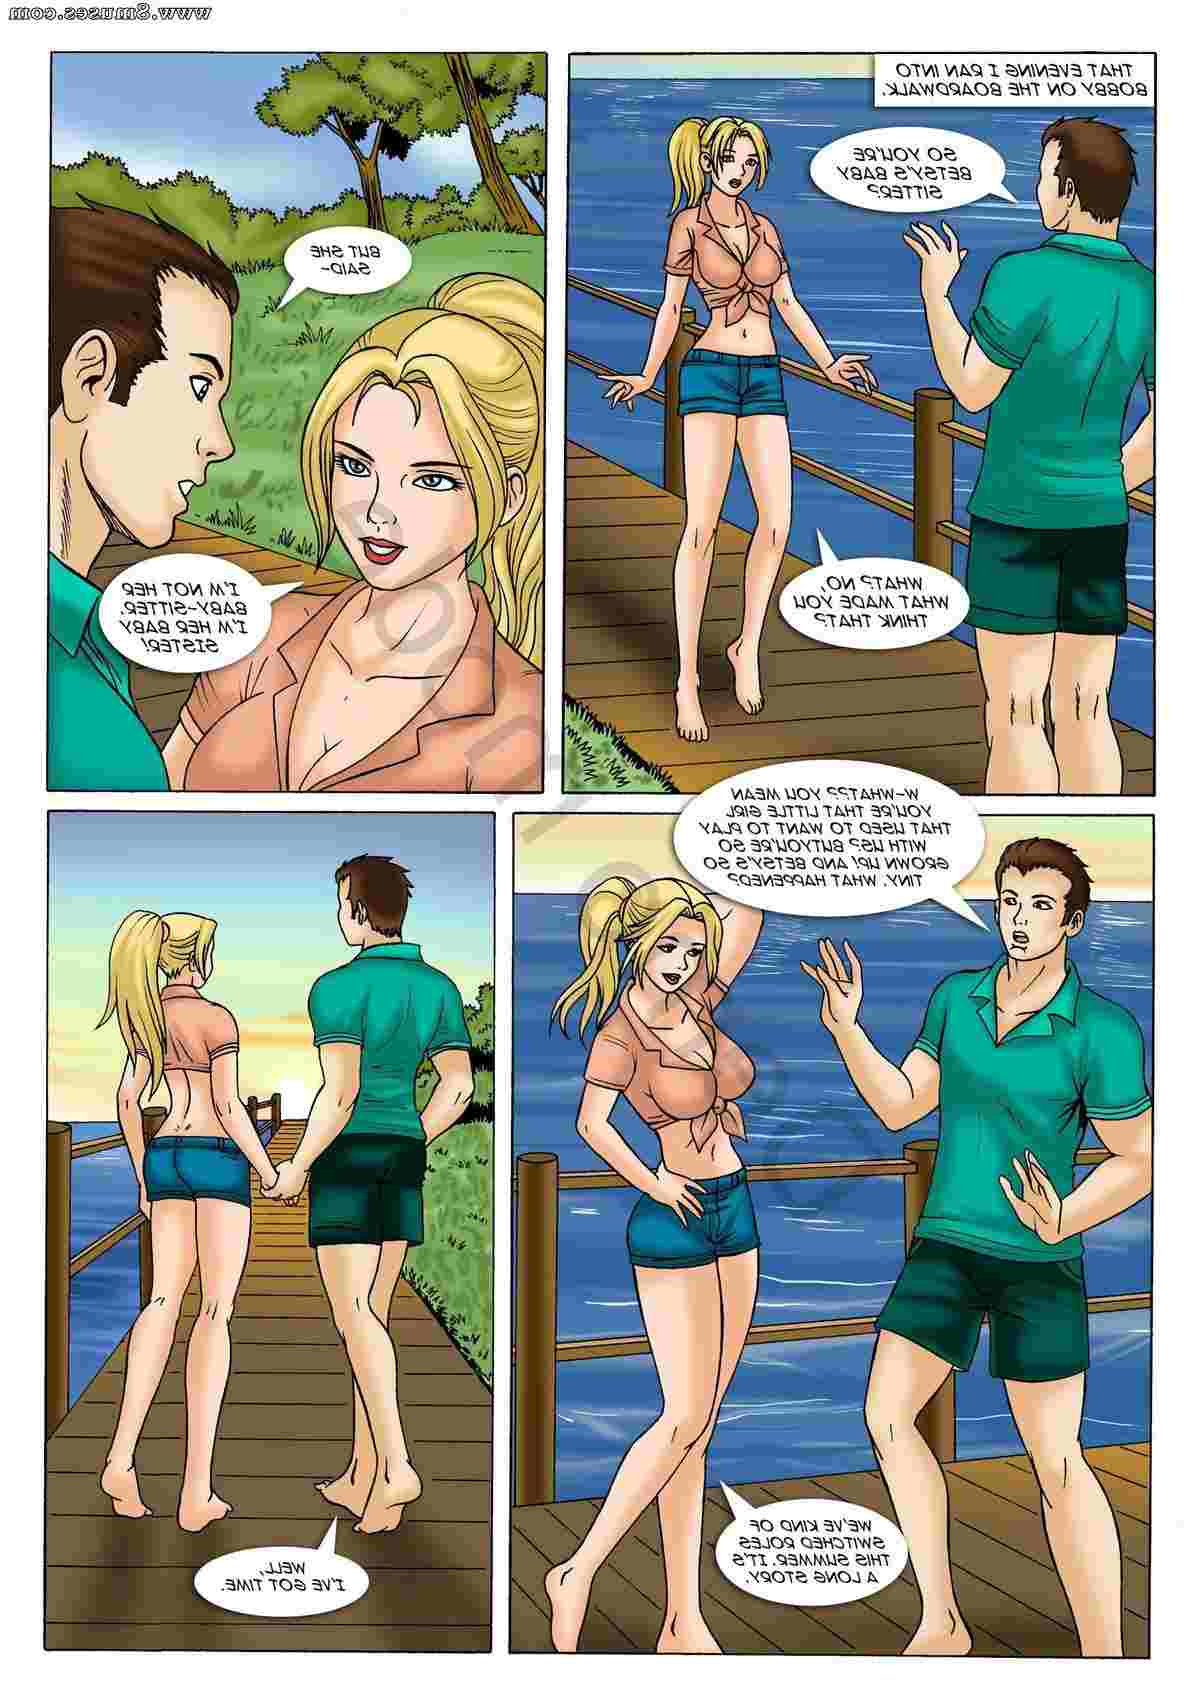 DreamTales-Comics/A-Tale-of-Two-Sisters A_Tale_of_Two_Sisters__8muses_-_Sex_and_Porn_Comics_13.jpg